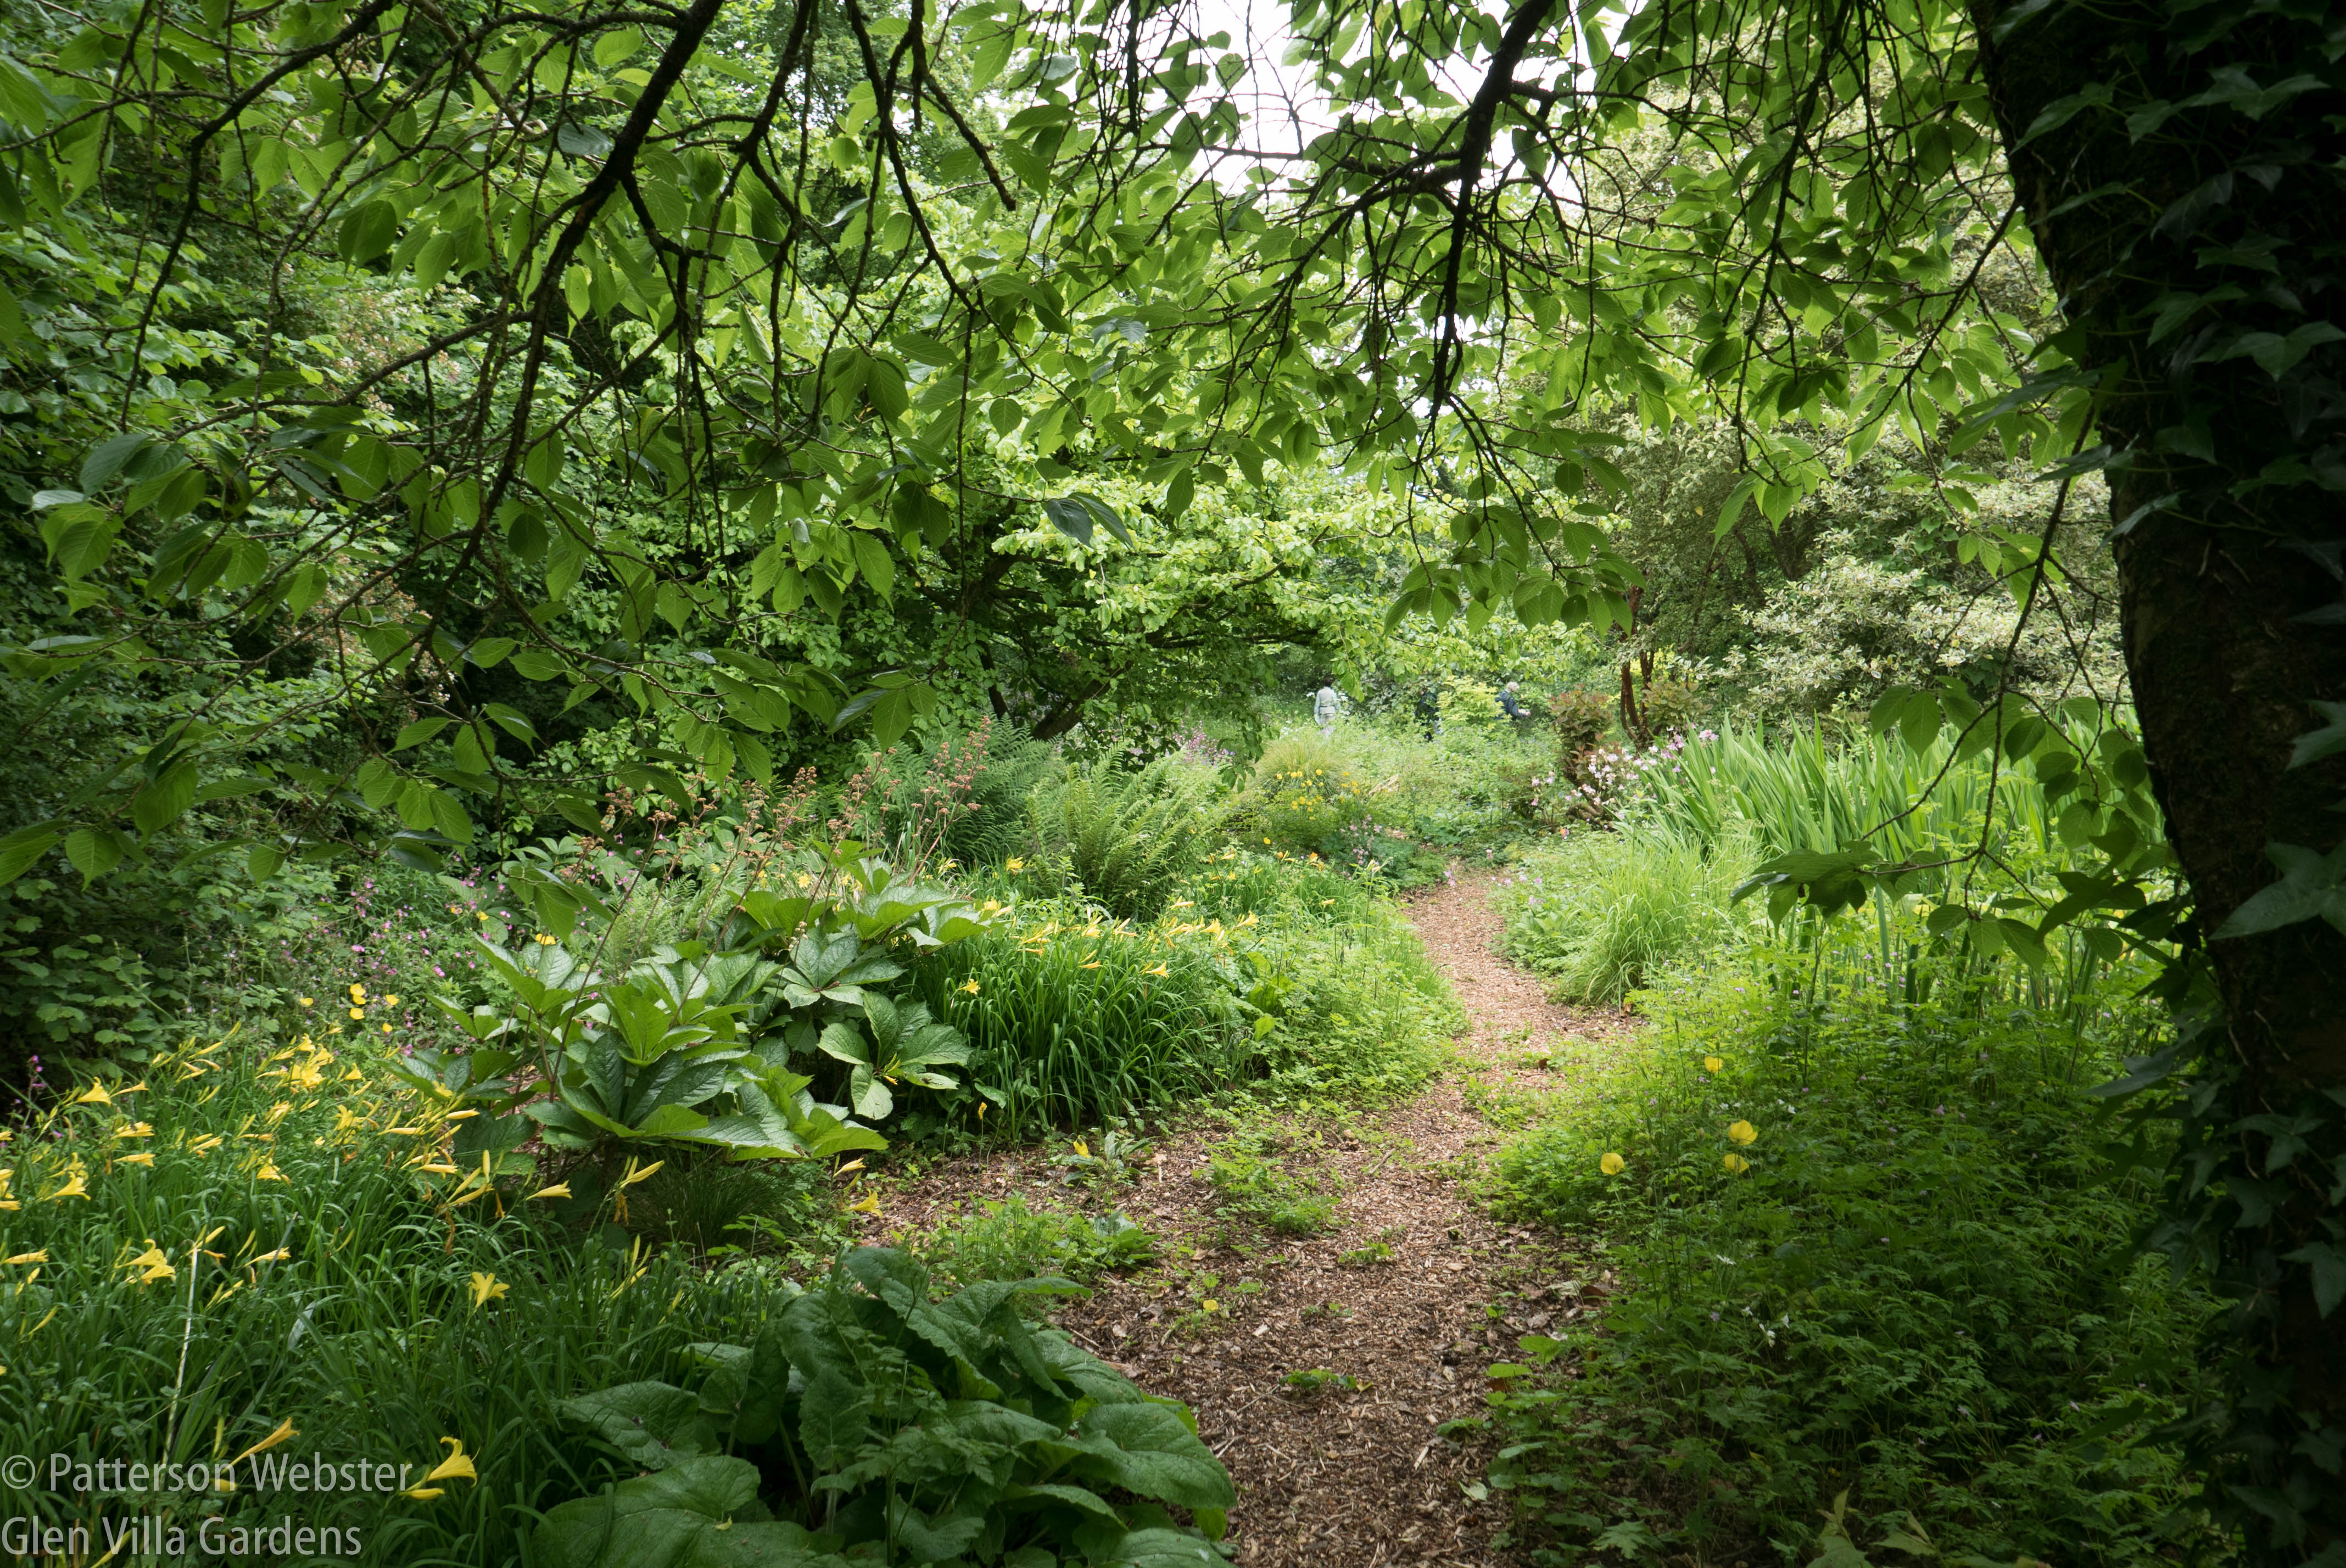 This photo shows a wood chip path at Holbrooke Gardens, an English garden specializing in informality.